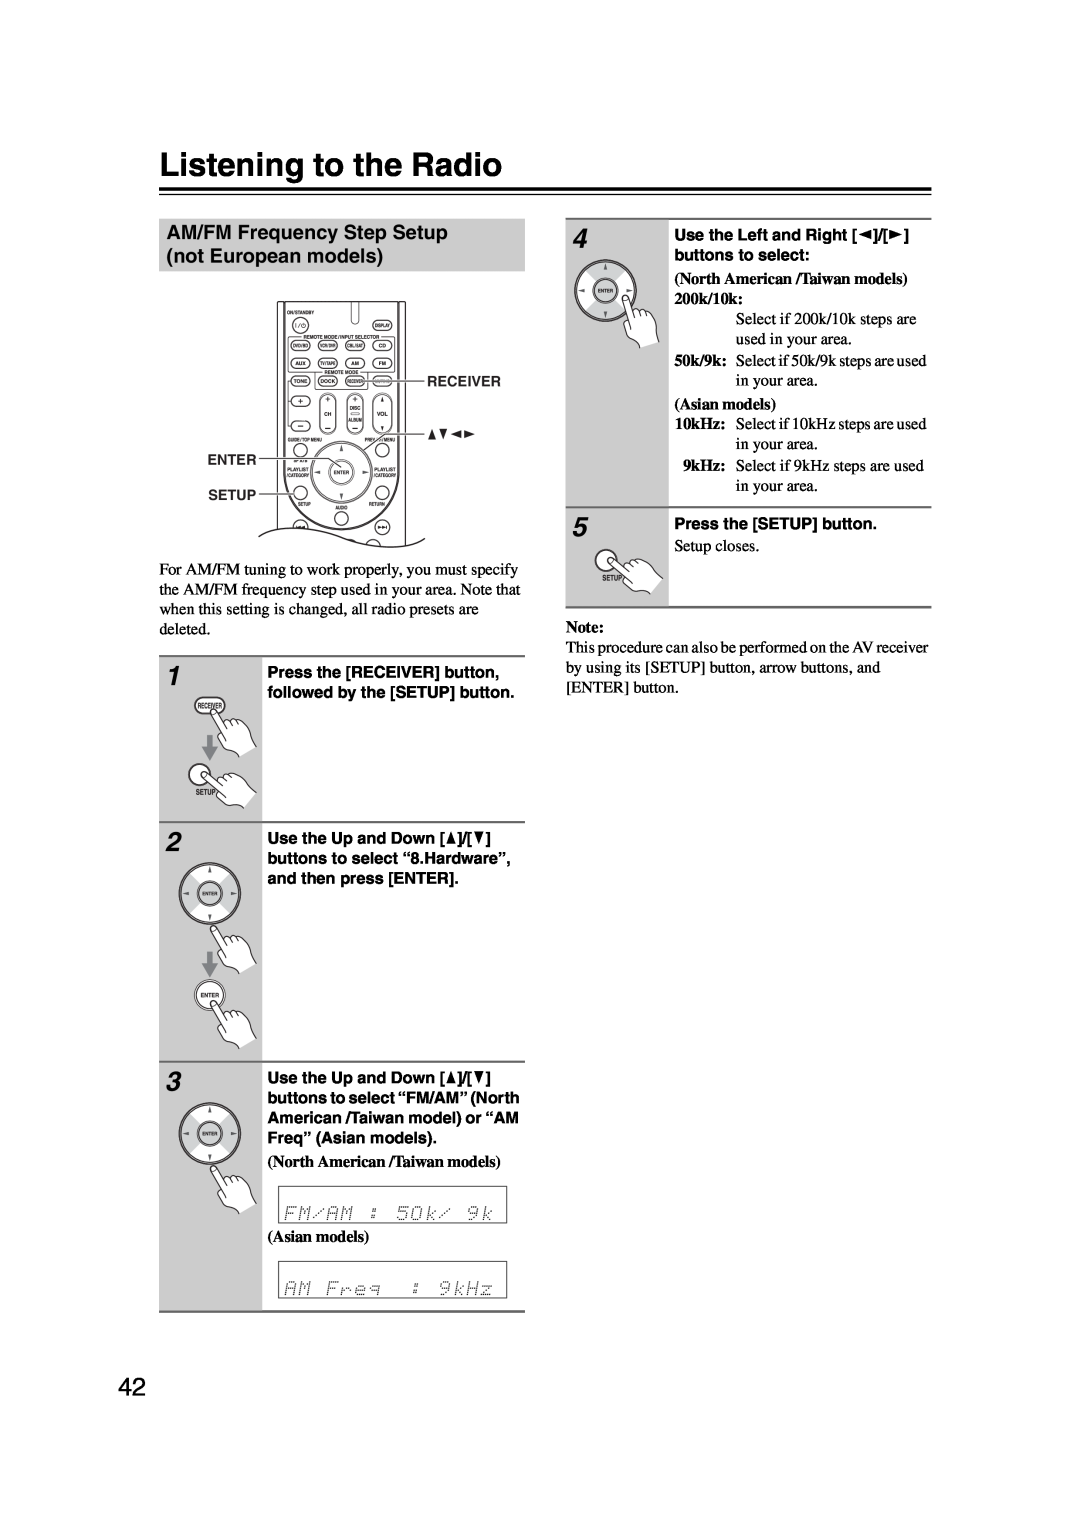 Onkyo TXSR307 instruction manual Listening to the Radio, AM/FM Frequency Step Setup not European models, Asian models 